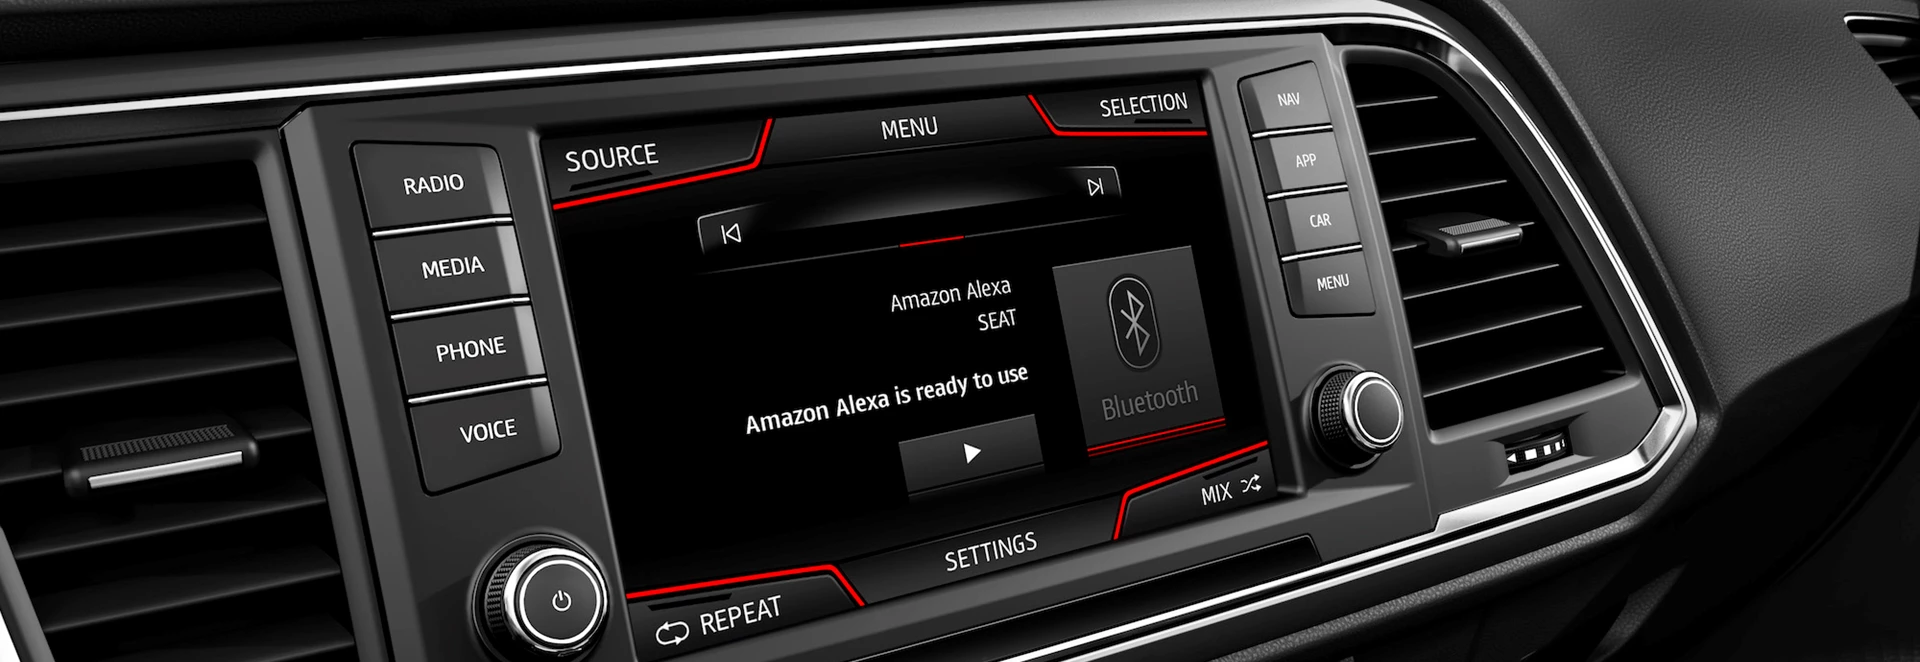 Amazon Alexa now available in Seat models 